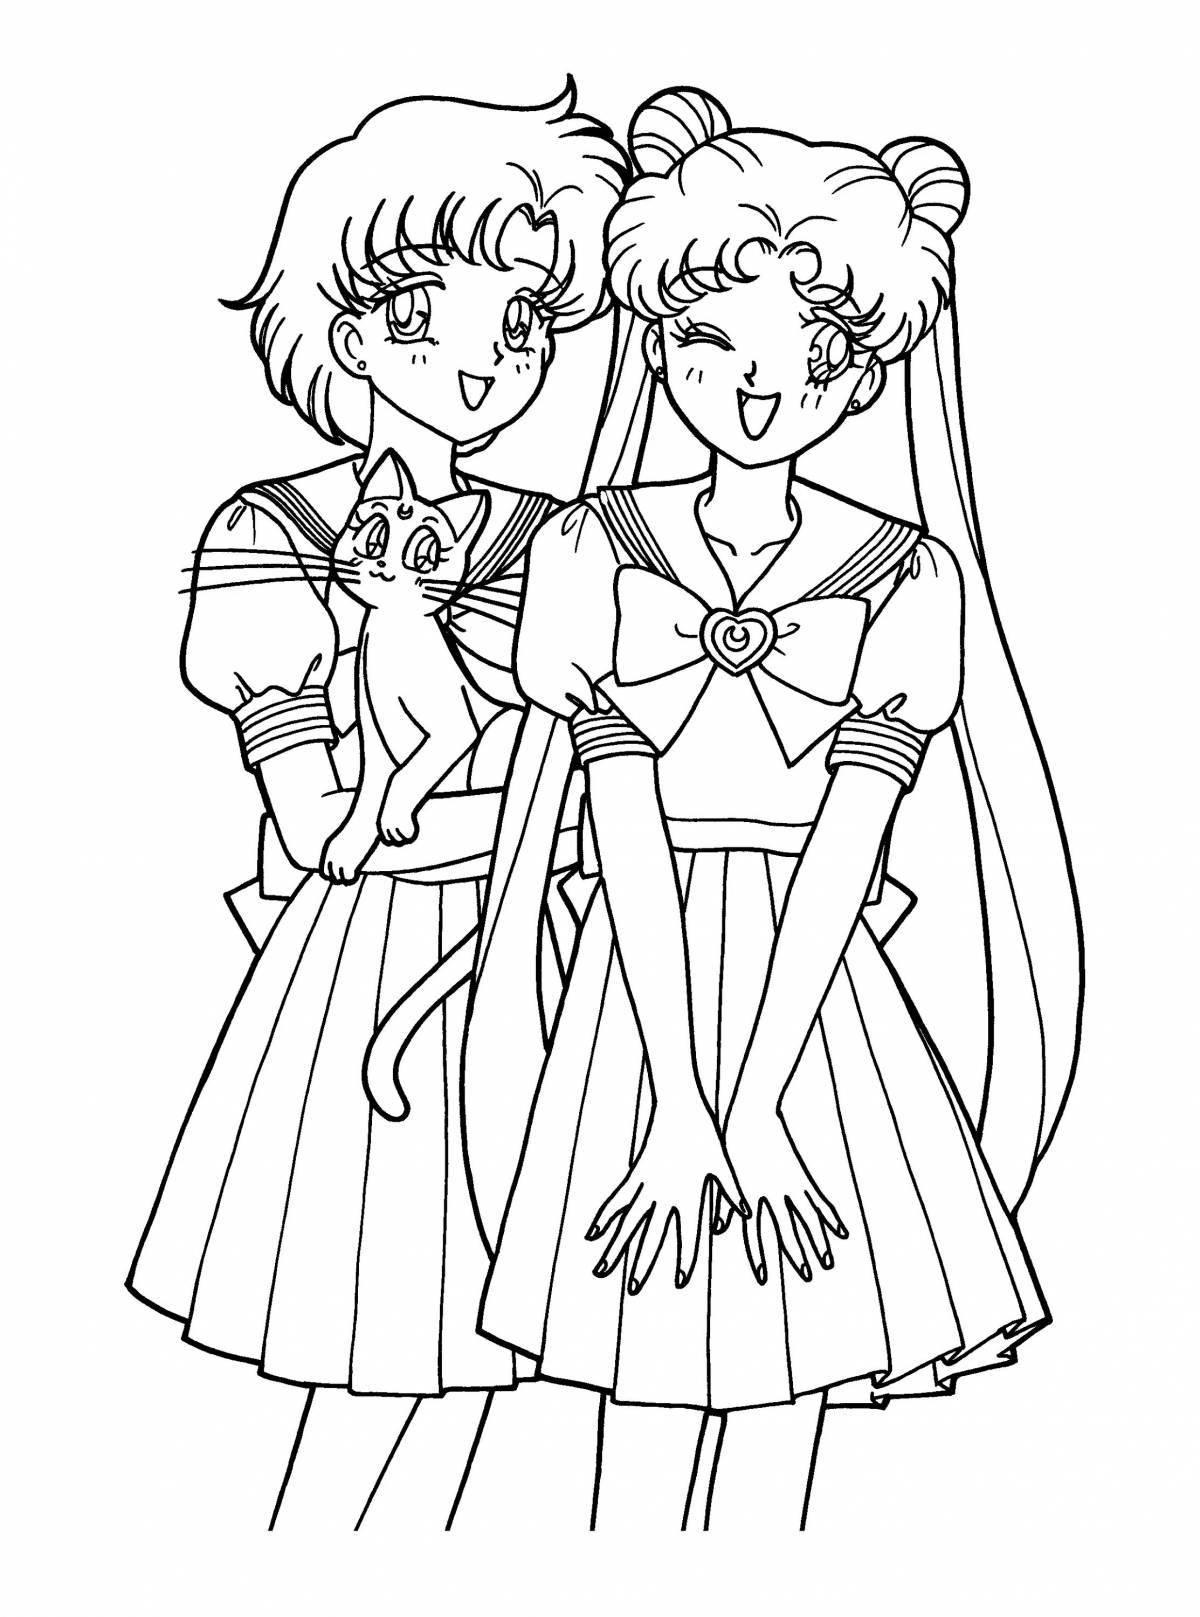 Marvelous coloring book for girls sailor moon